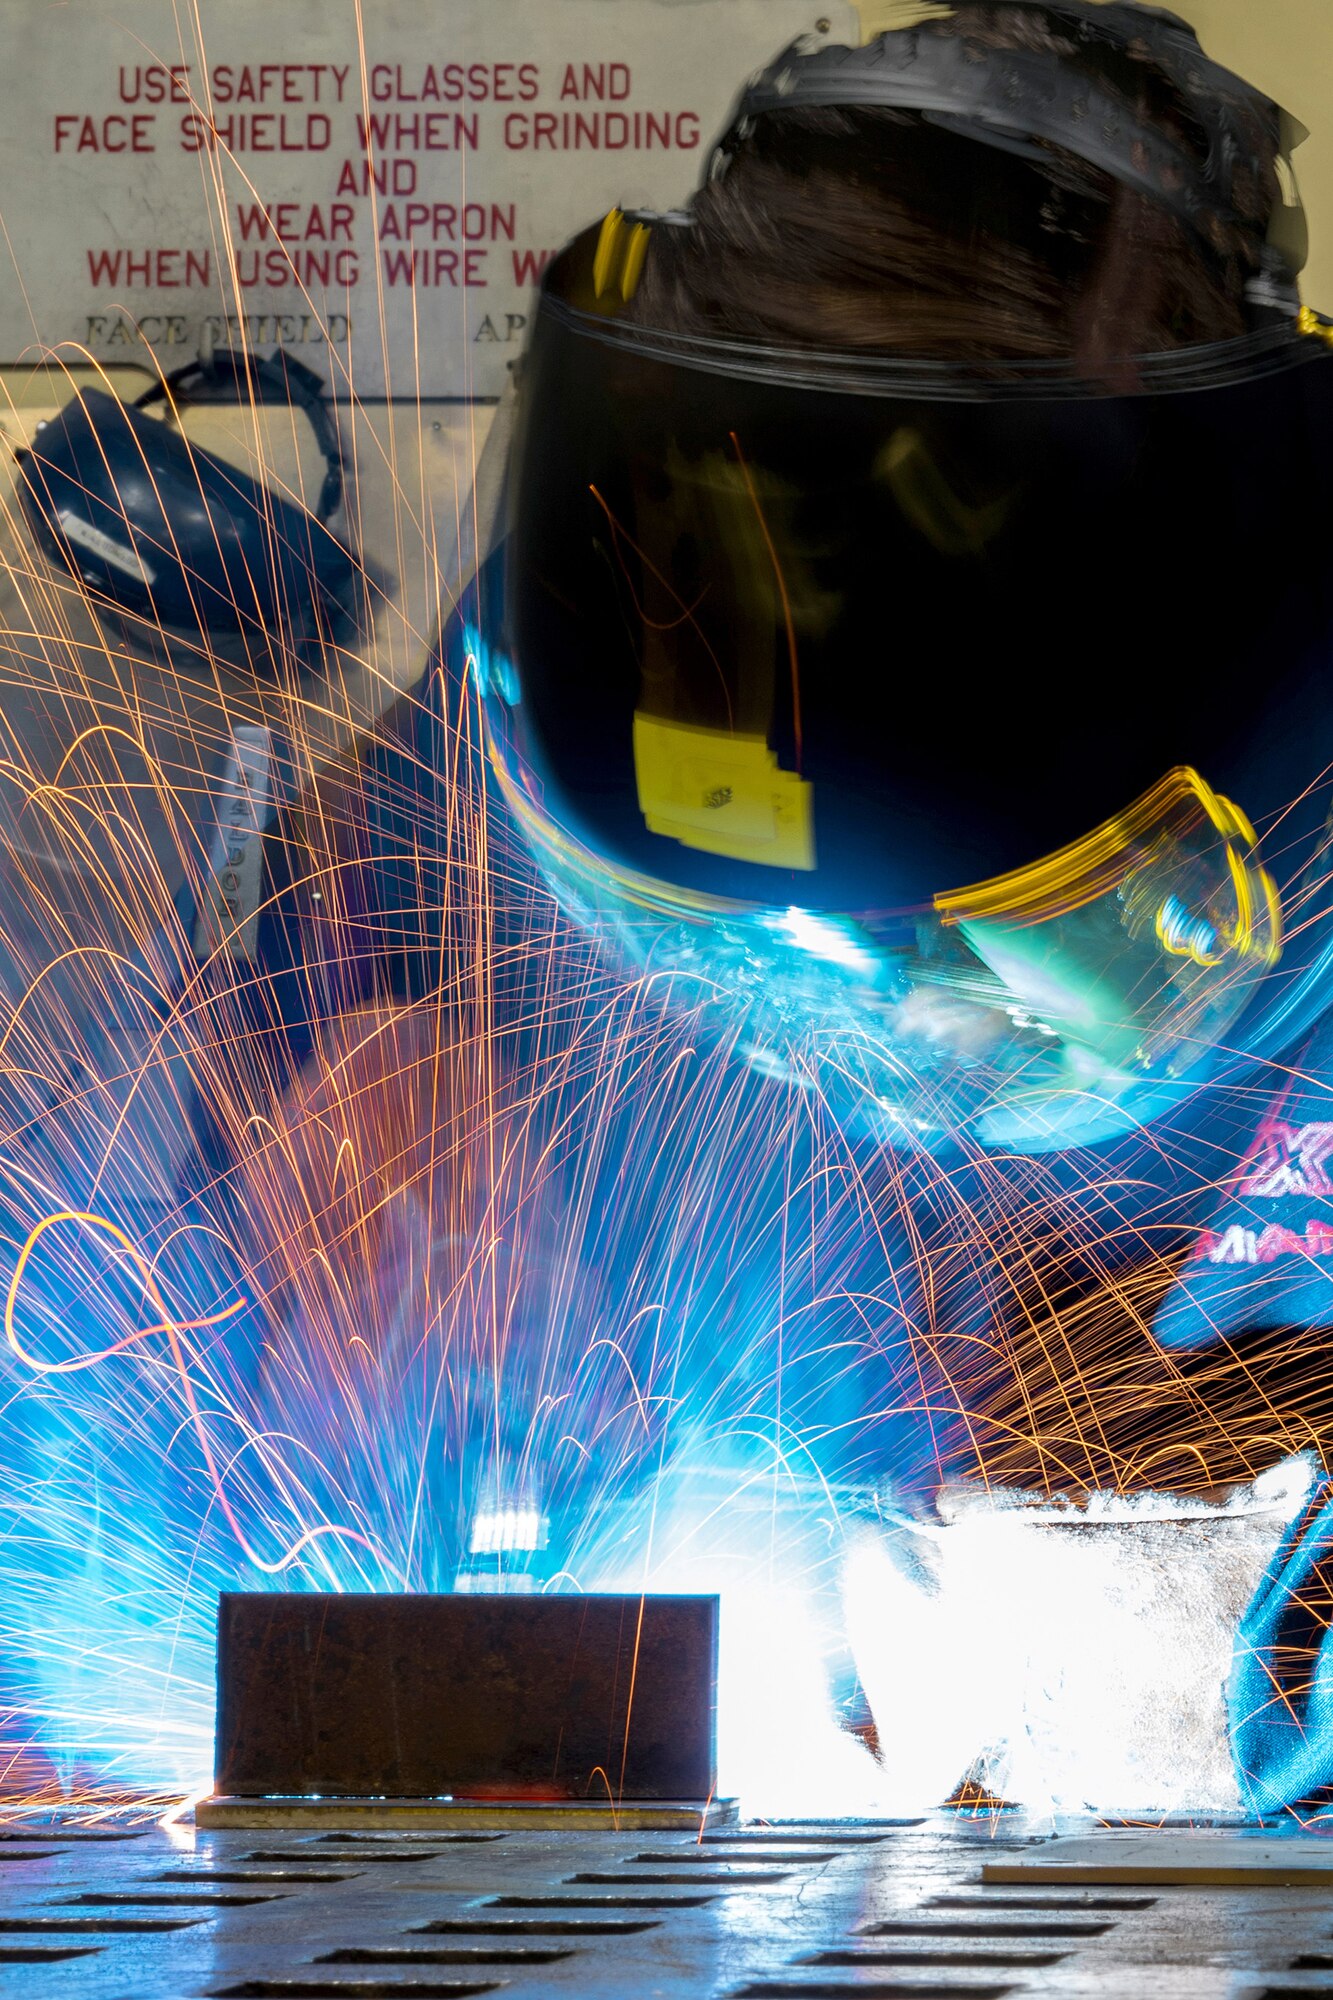 Airman Dalton Sturtz, a native of Seguin, Texas, an aircraft metals technology journeyman assigned to the 3rd Maintenance Squadron, practices welding a metal plate in the metals fabrication shop on Joint Base Elmendorf-Richardson, Alaska, May 9, 2018. Aircraft Metals Technology Airmen measure broken or worn parts, draw working sketches, make templates, perform precision grinding remove poisonous or corrosive deposits from parts, and write programs for machines using manual and computer-aided manufacturing.